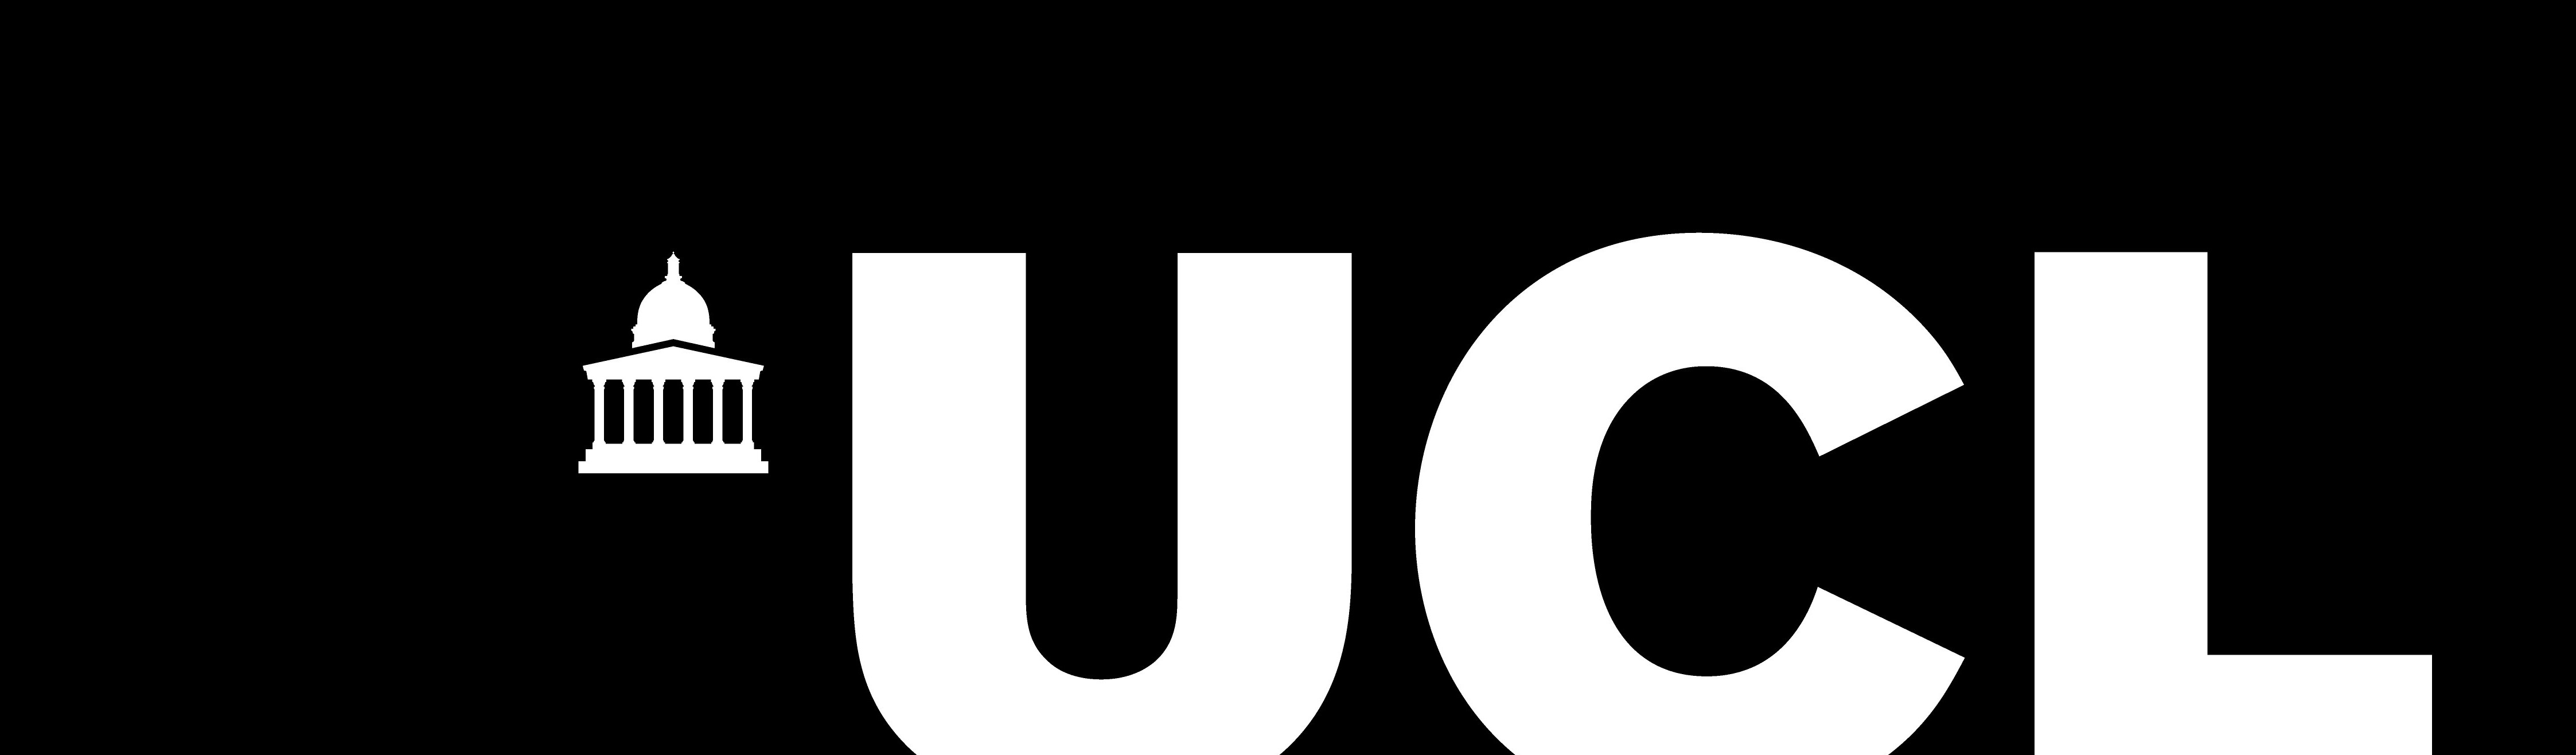 logo for University College London (UCL)